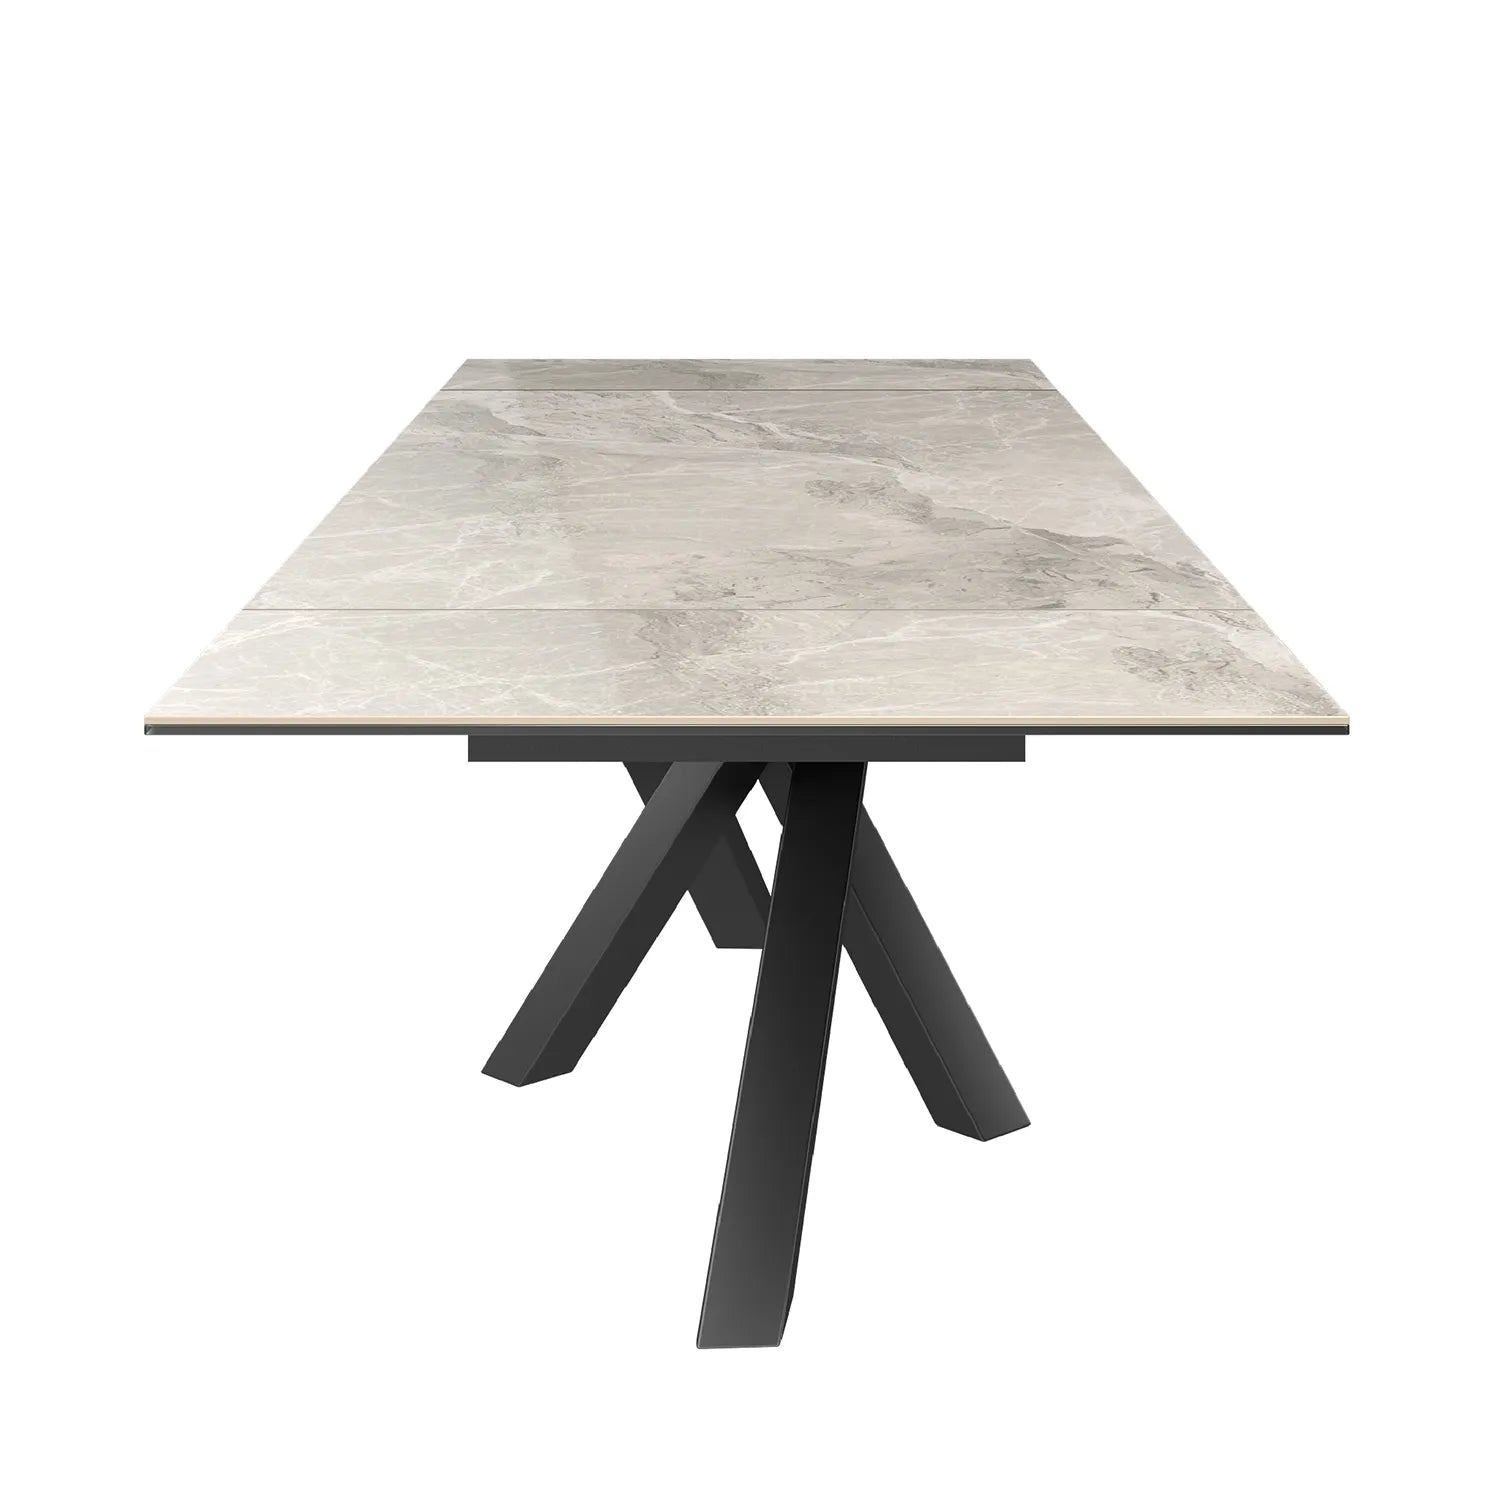 Samurai Light Grey Extending Ceramic Dining Table And 4 Chairs